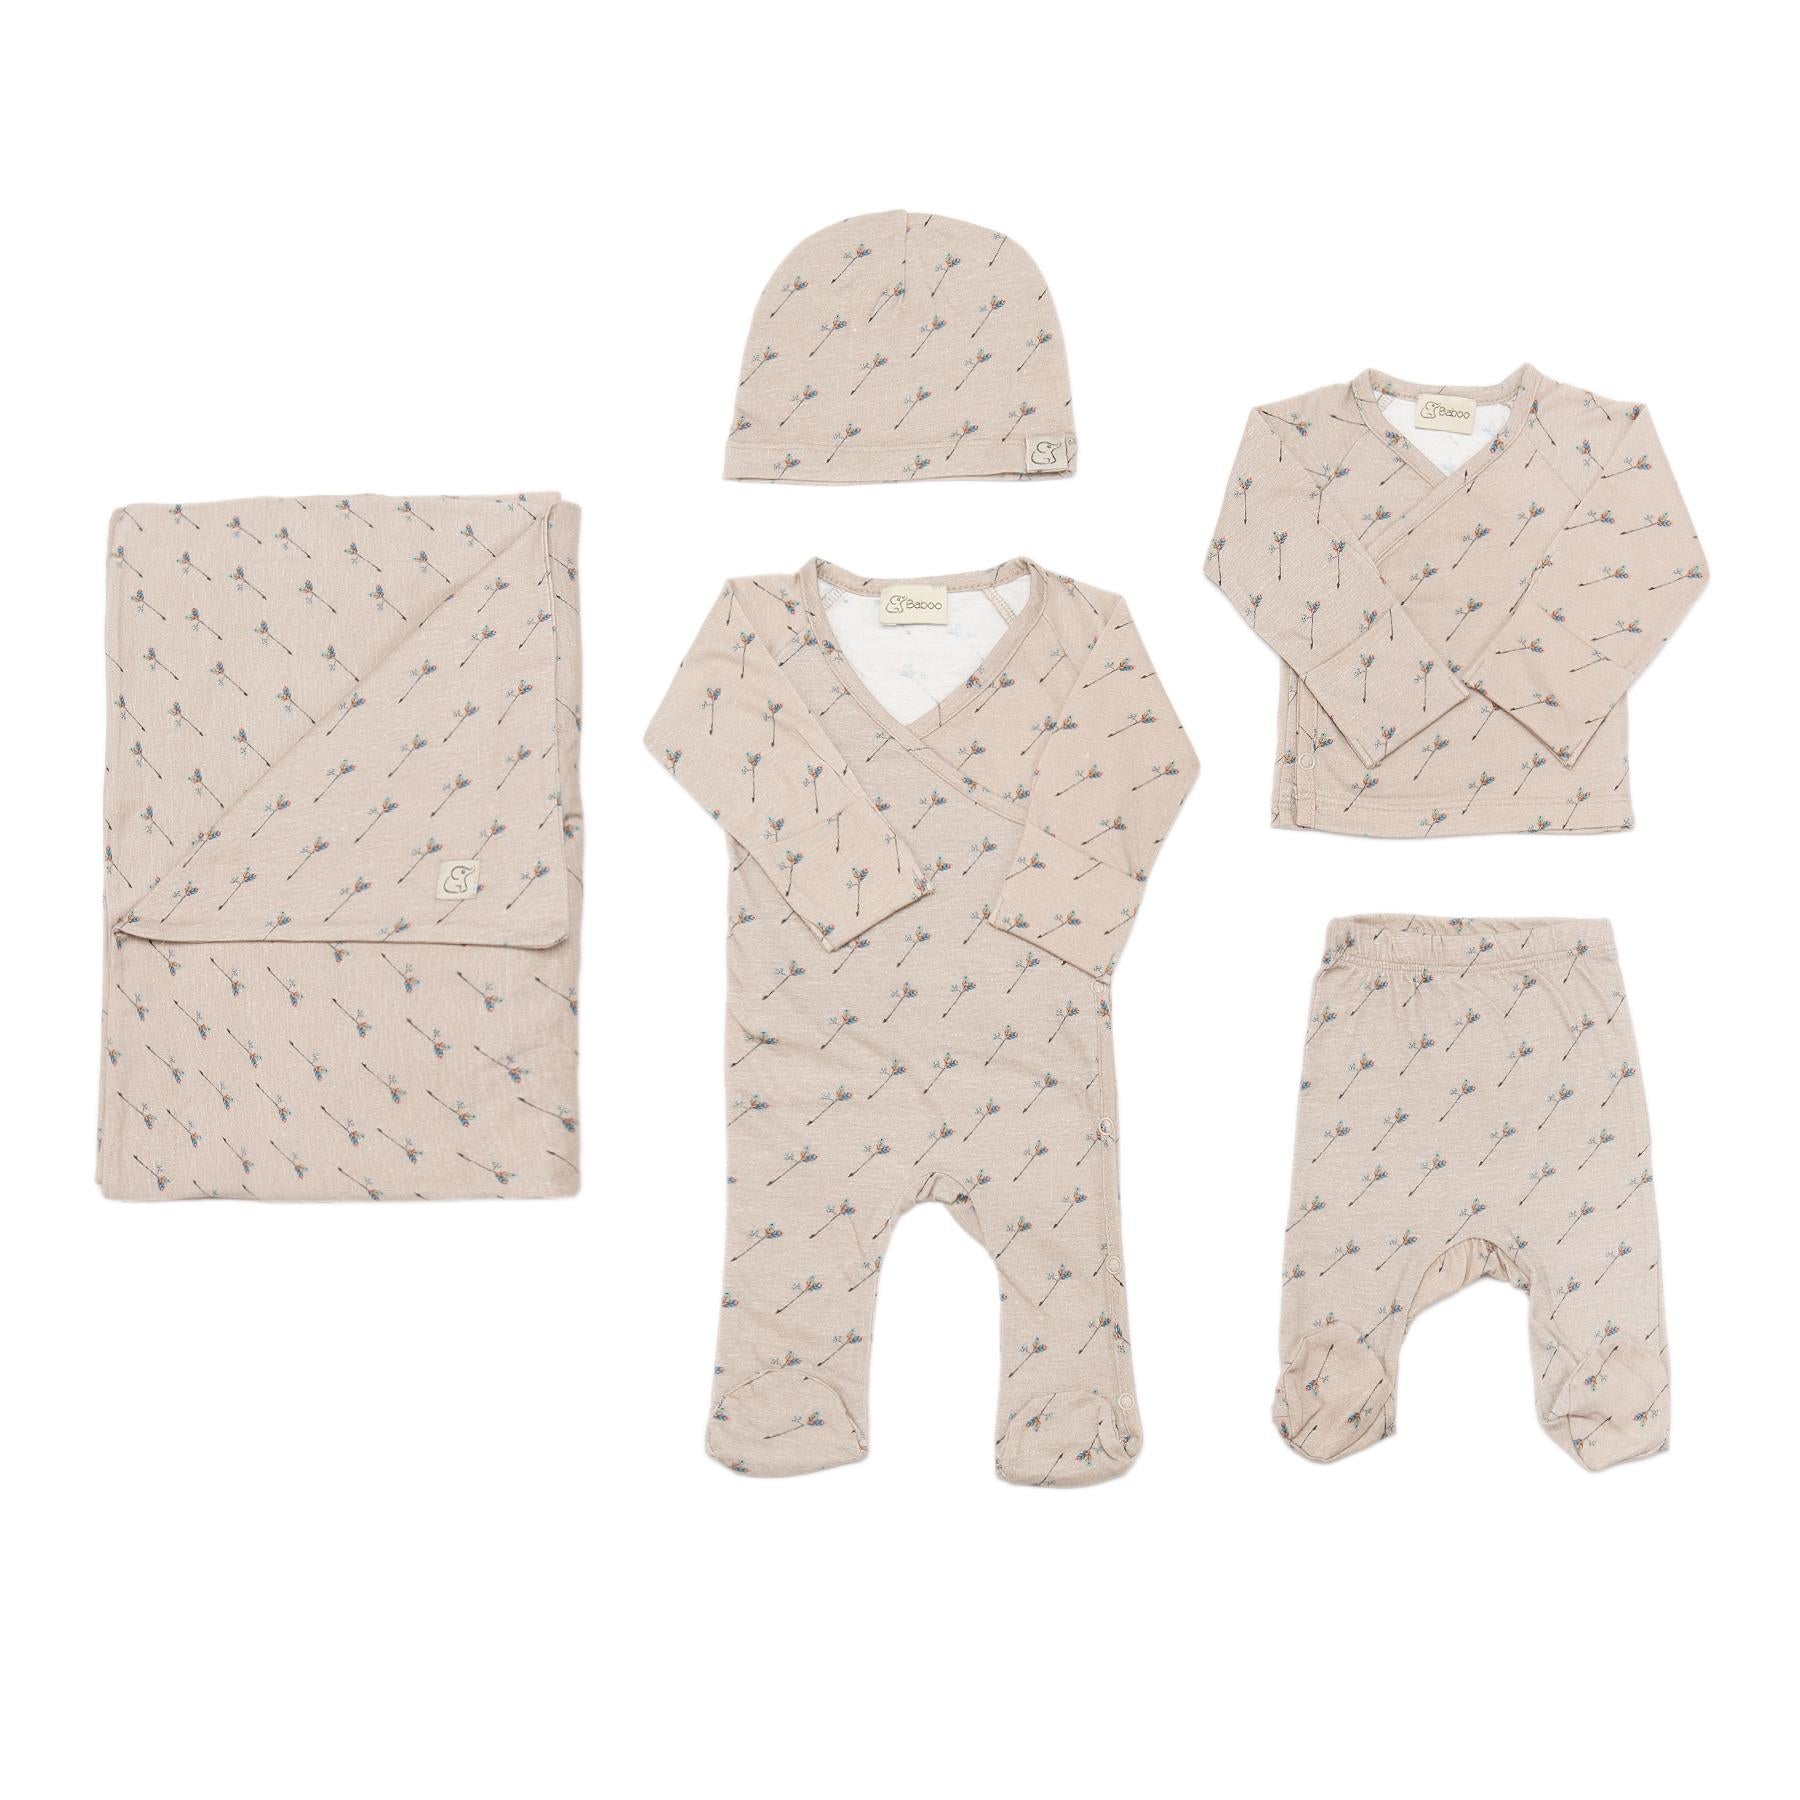 Newborn Patterned Organic Cotton Hospital Release Set of 5 Brown